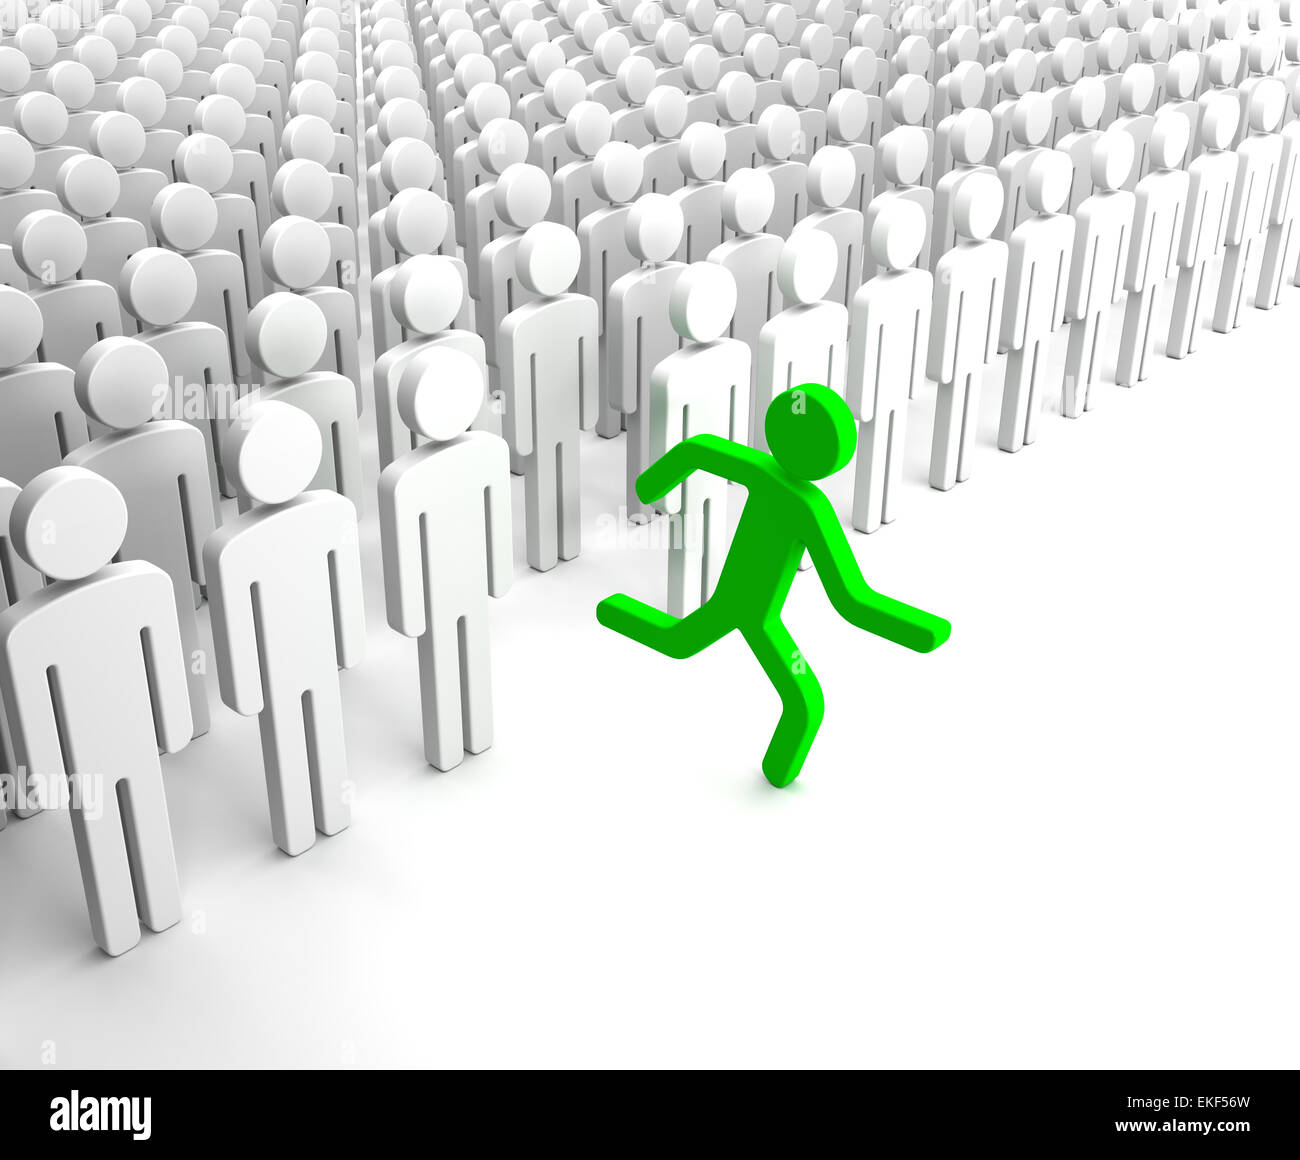 Red Human Figure Running from the Crowd of Gray Indifferent Huma Stock Photo